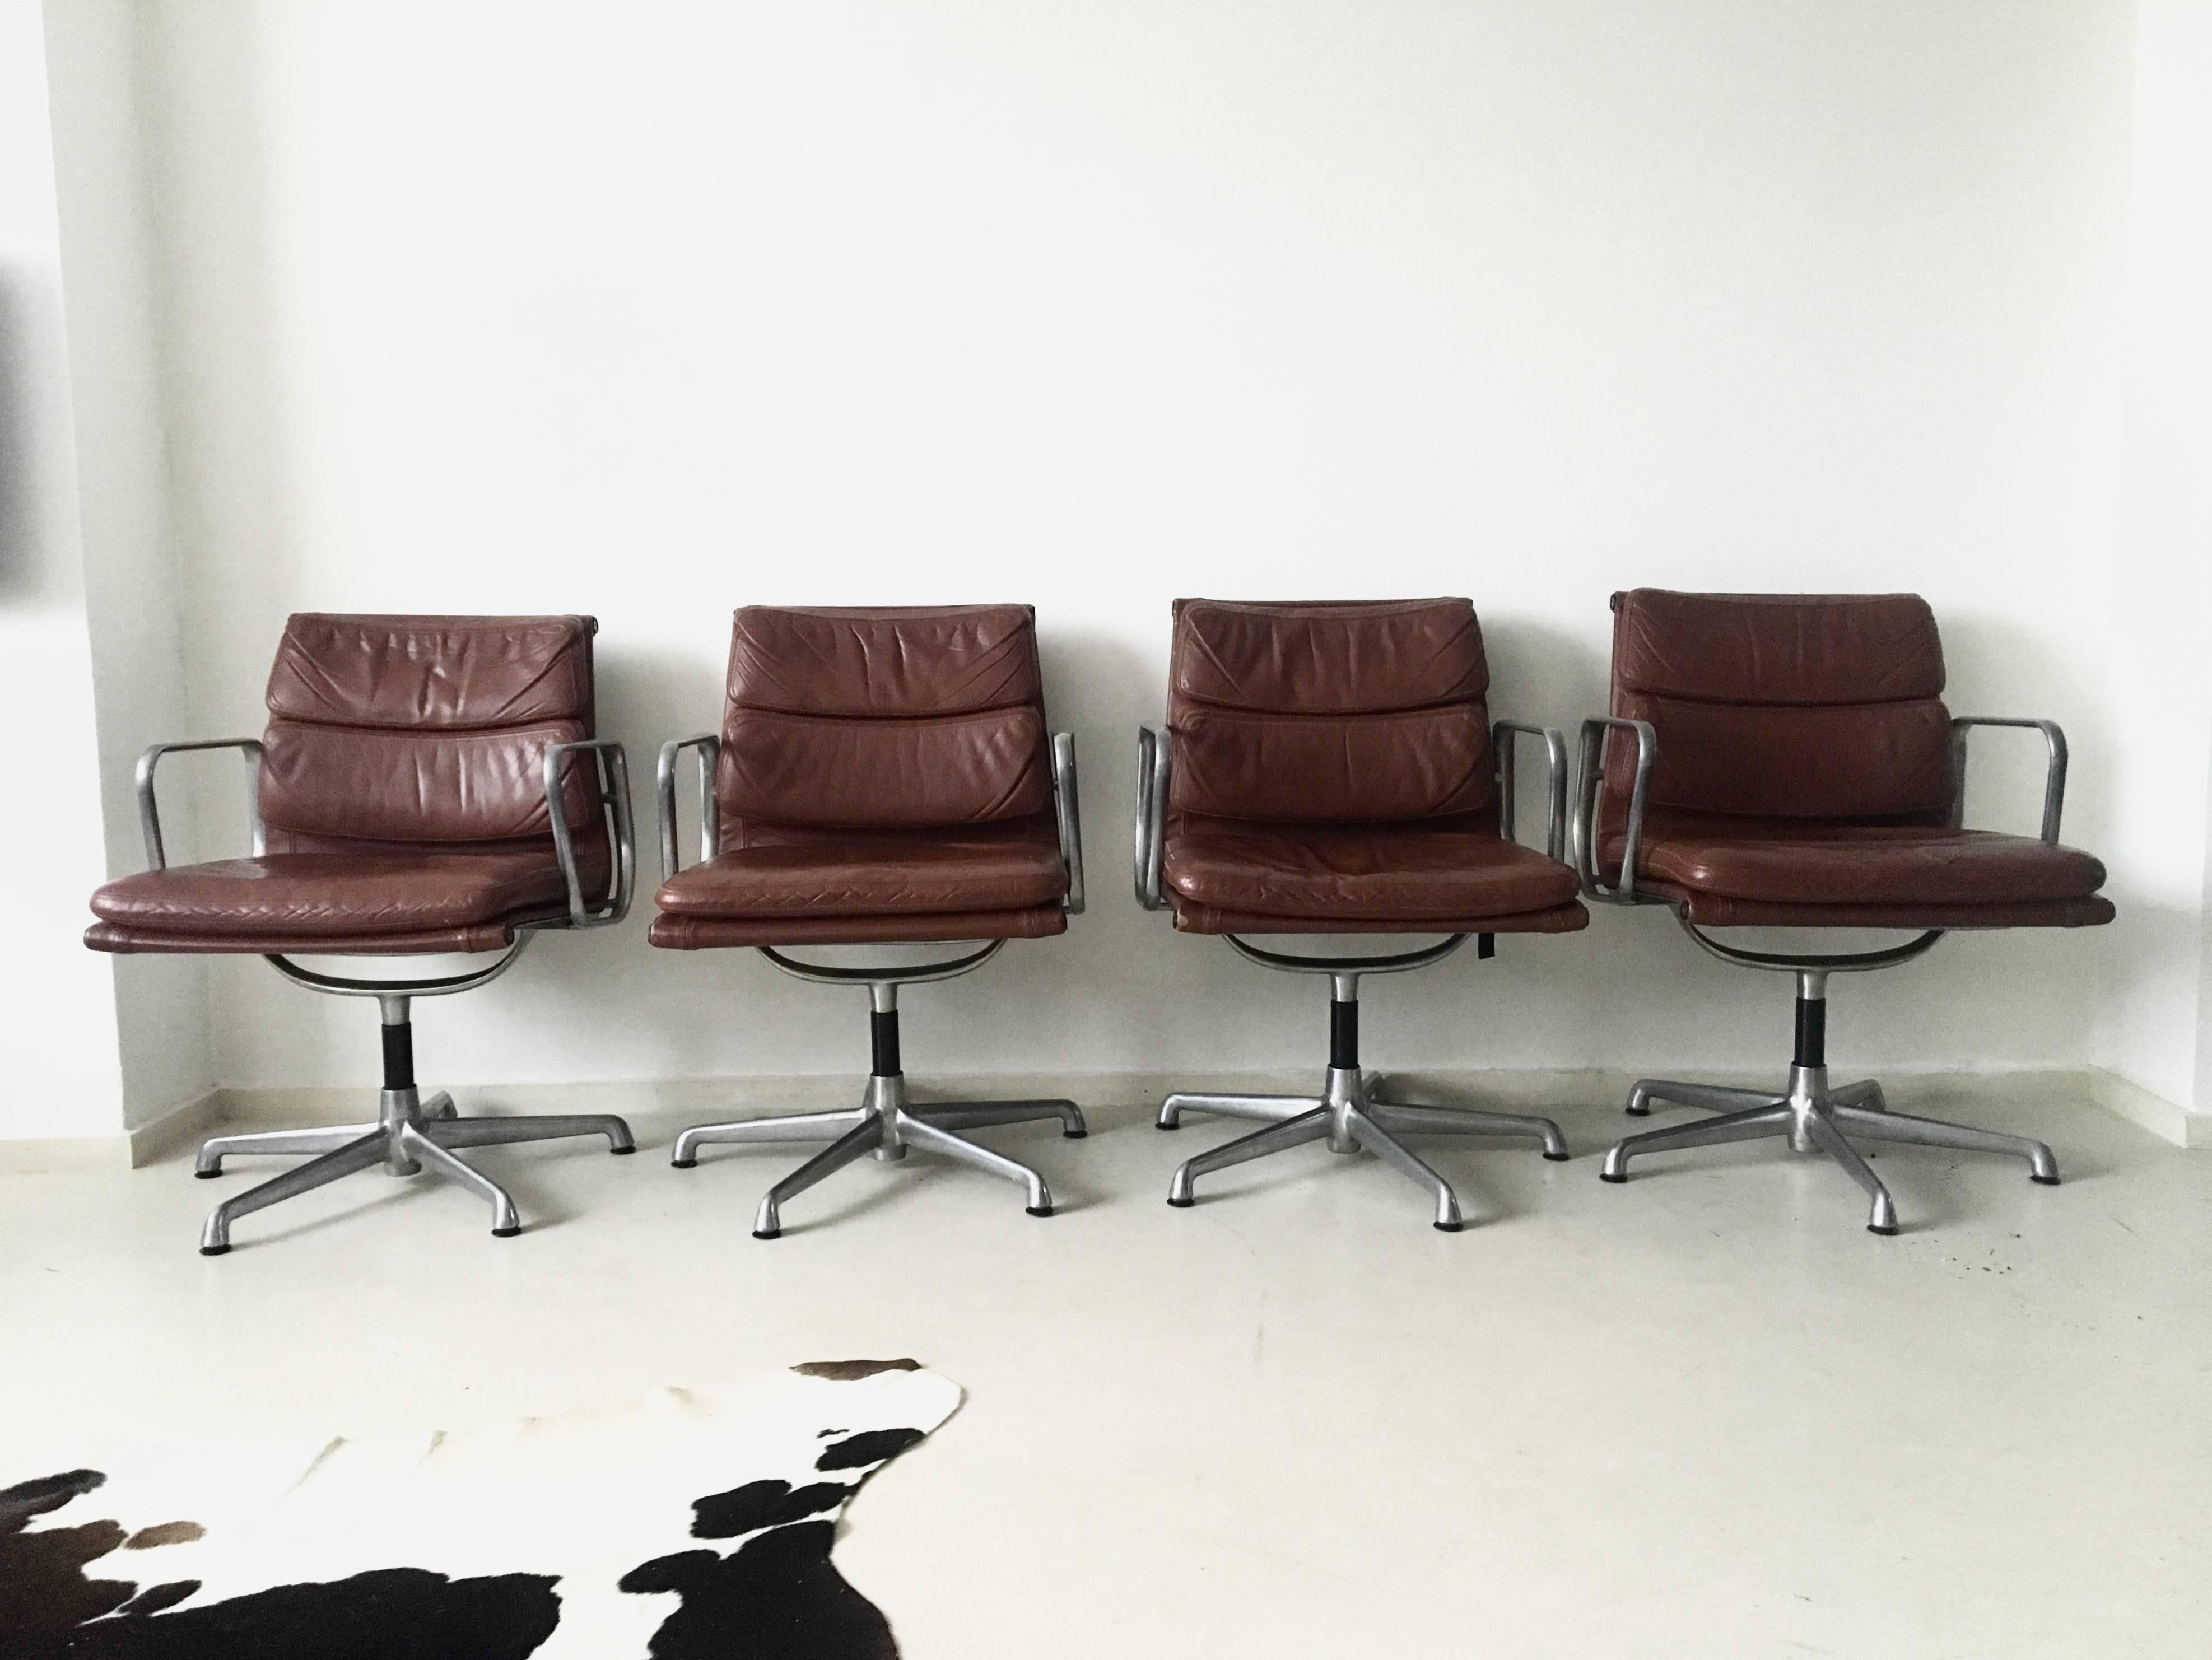 icf eames office chair